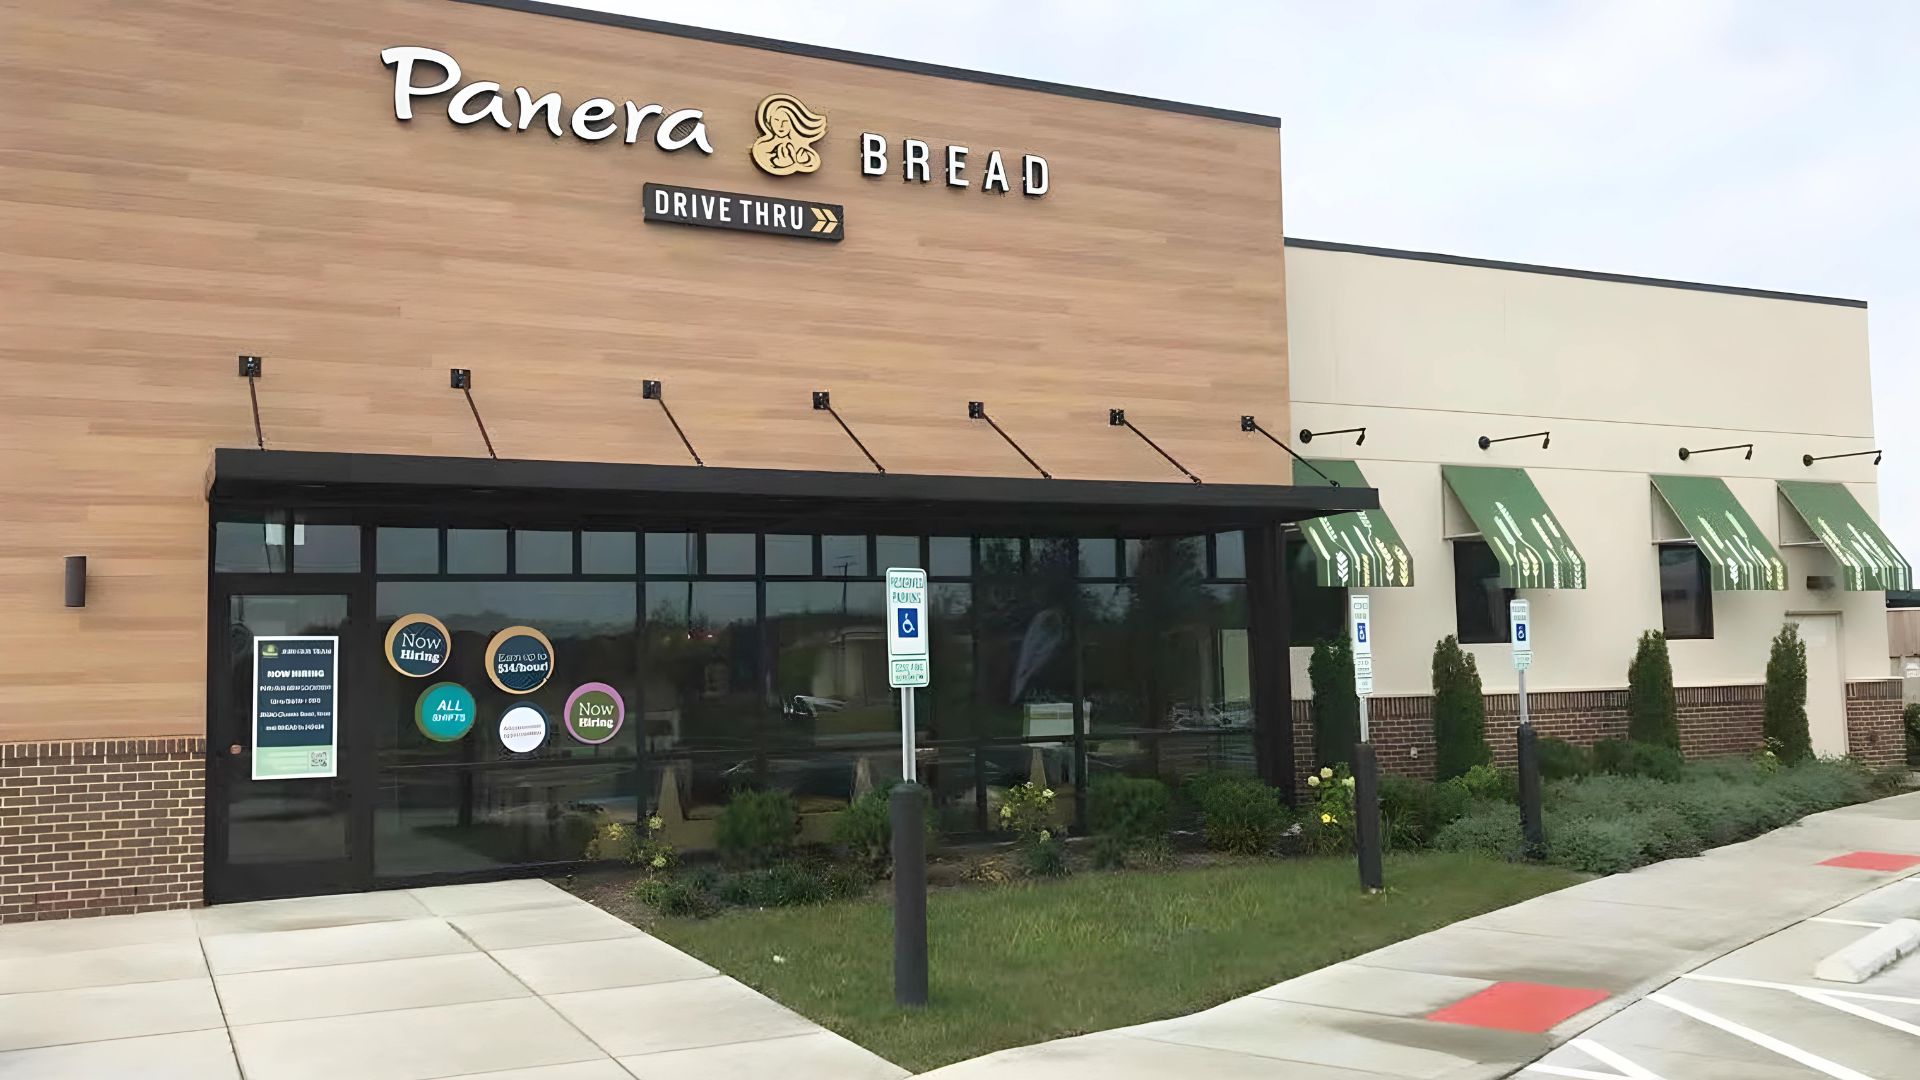 Panera Bread Avon OH Front of Building Fast Casual Restaurant